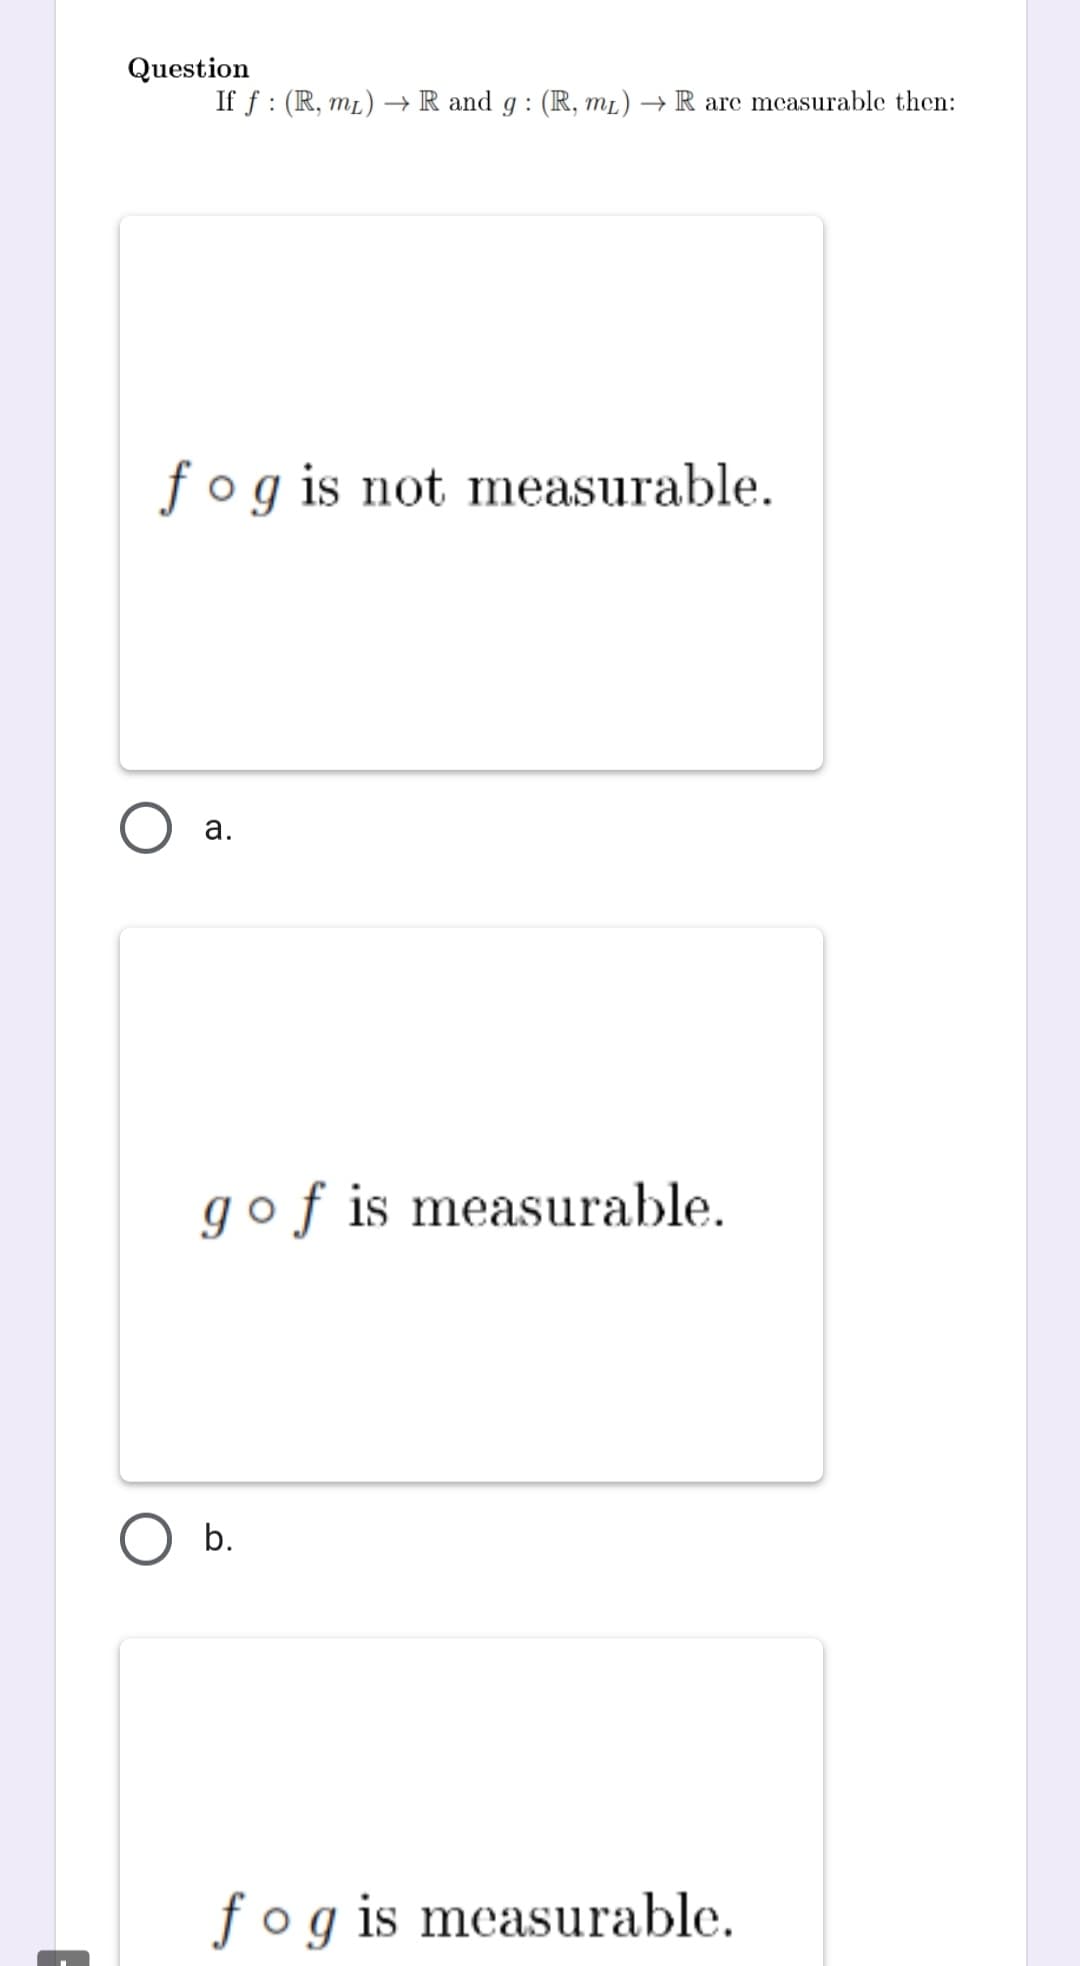 Question
If f: (R, mL) →→ R and g: (R, mL) → R are measurable then:
fog is not measurable.
a.
gof is measurable.
fog is measurable.
O b.